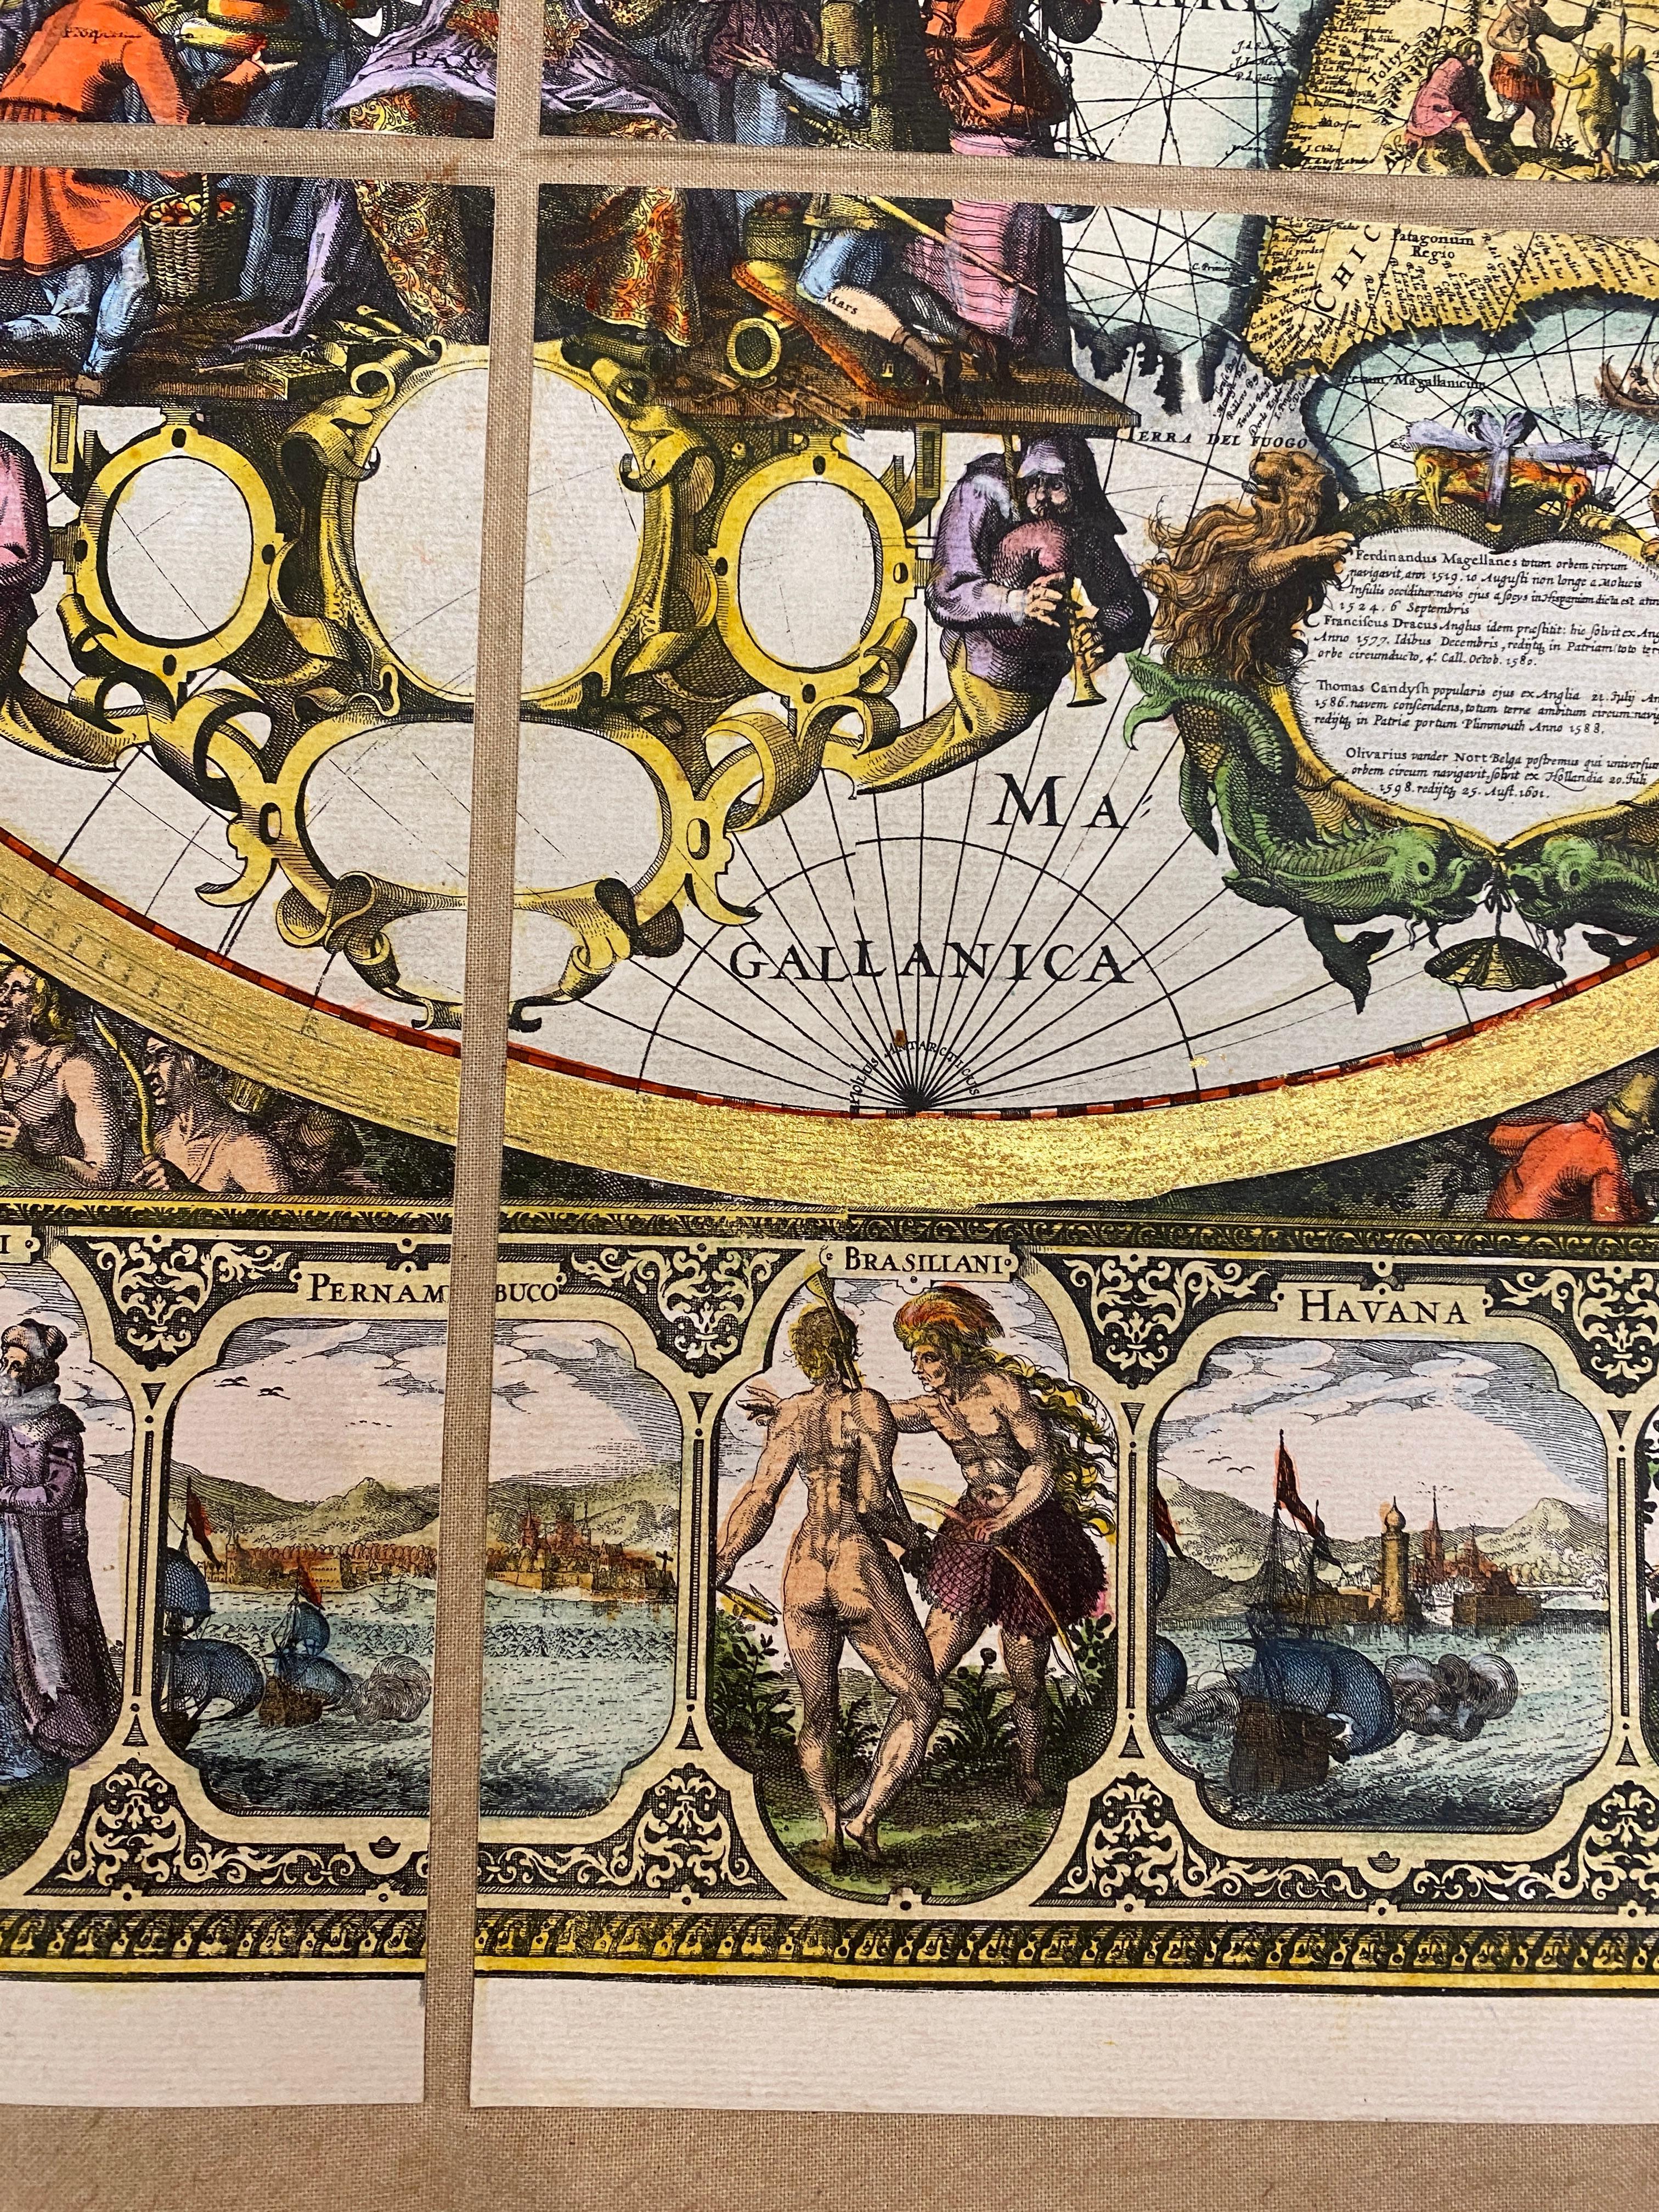 Beautiful reproduction of an antique English map showing th Planisfere, with continets, views of important cities and their population,  made in 1602 By Petri Kerl.
We can see with what mastery of joints and vivid colours the author depicts lands, ,